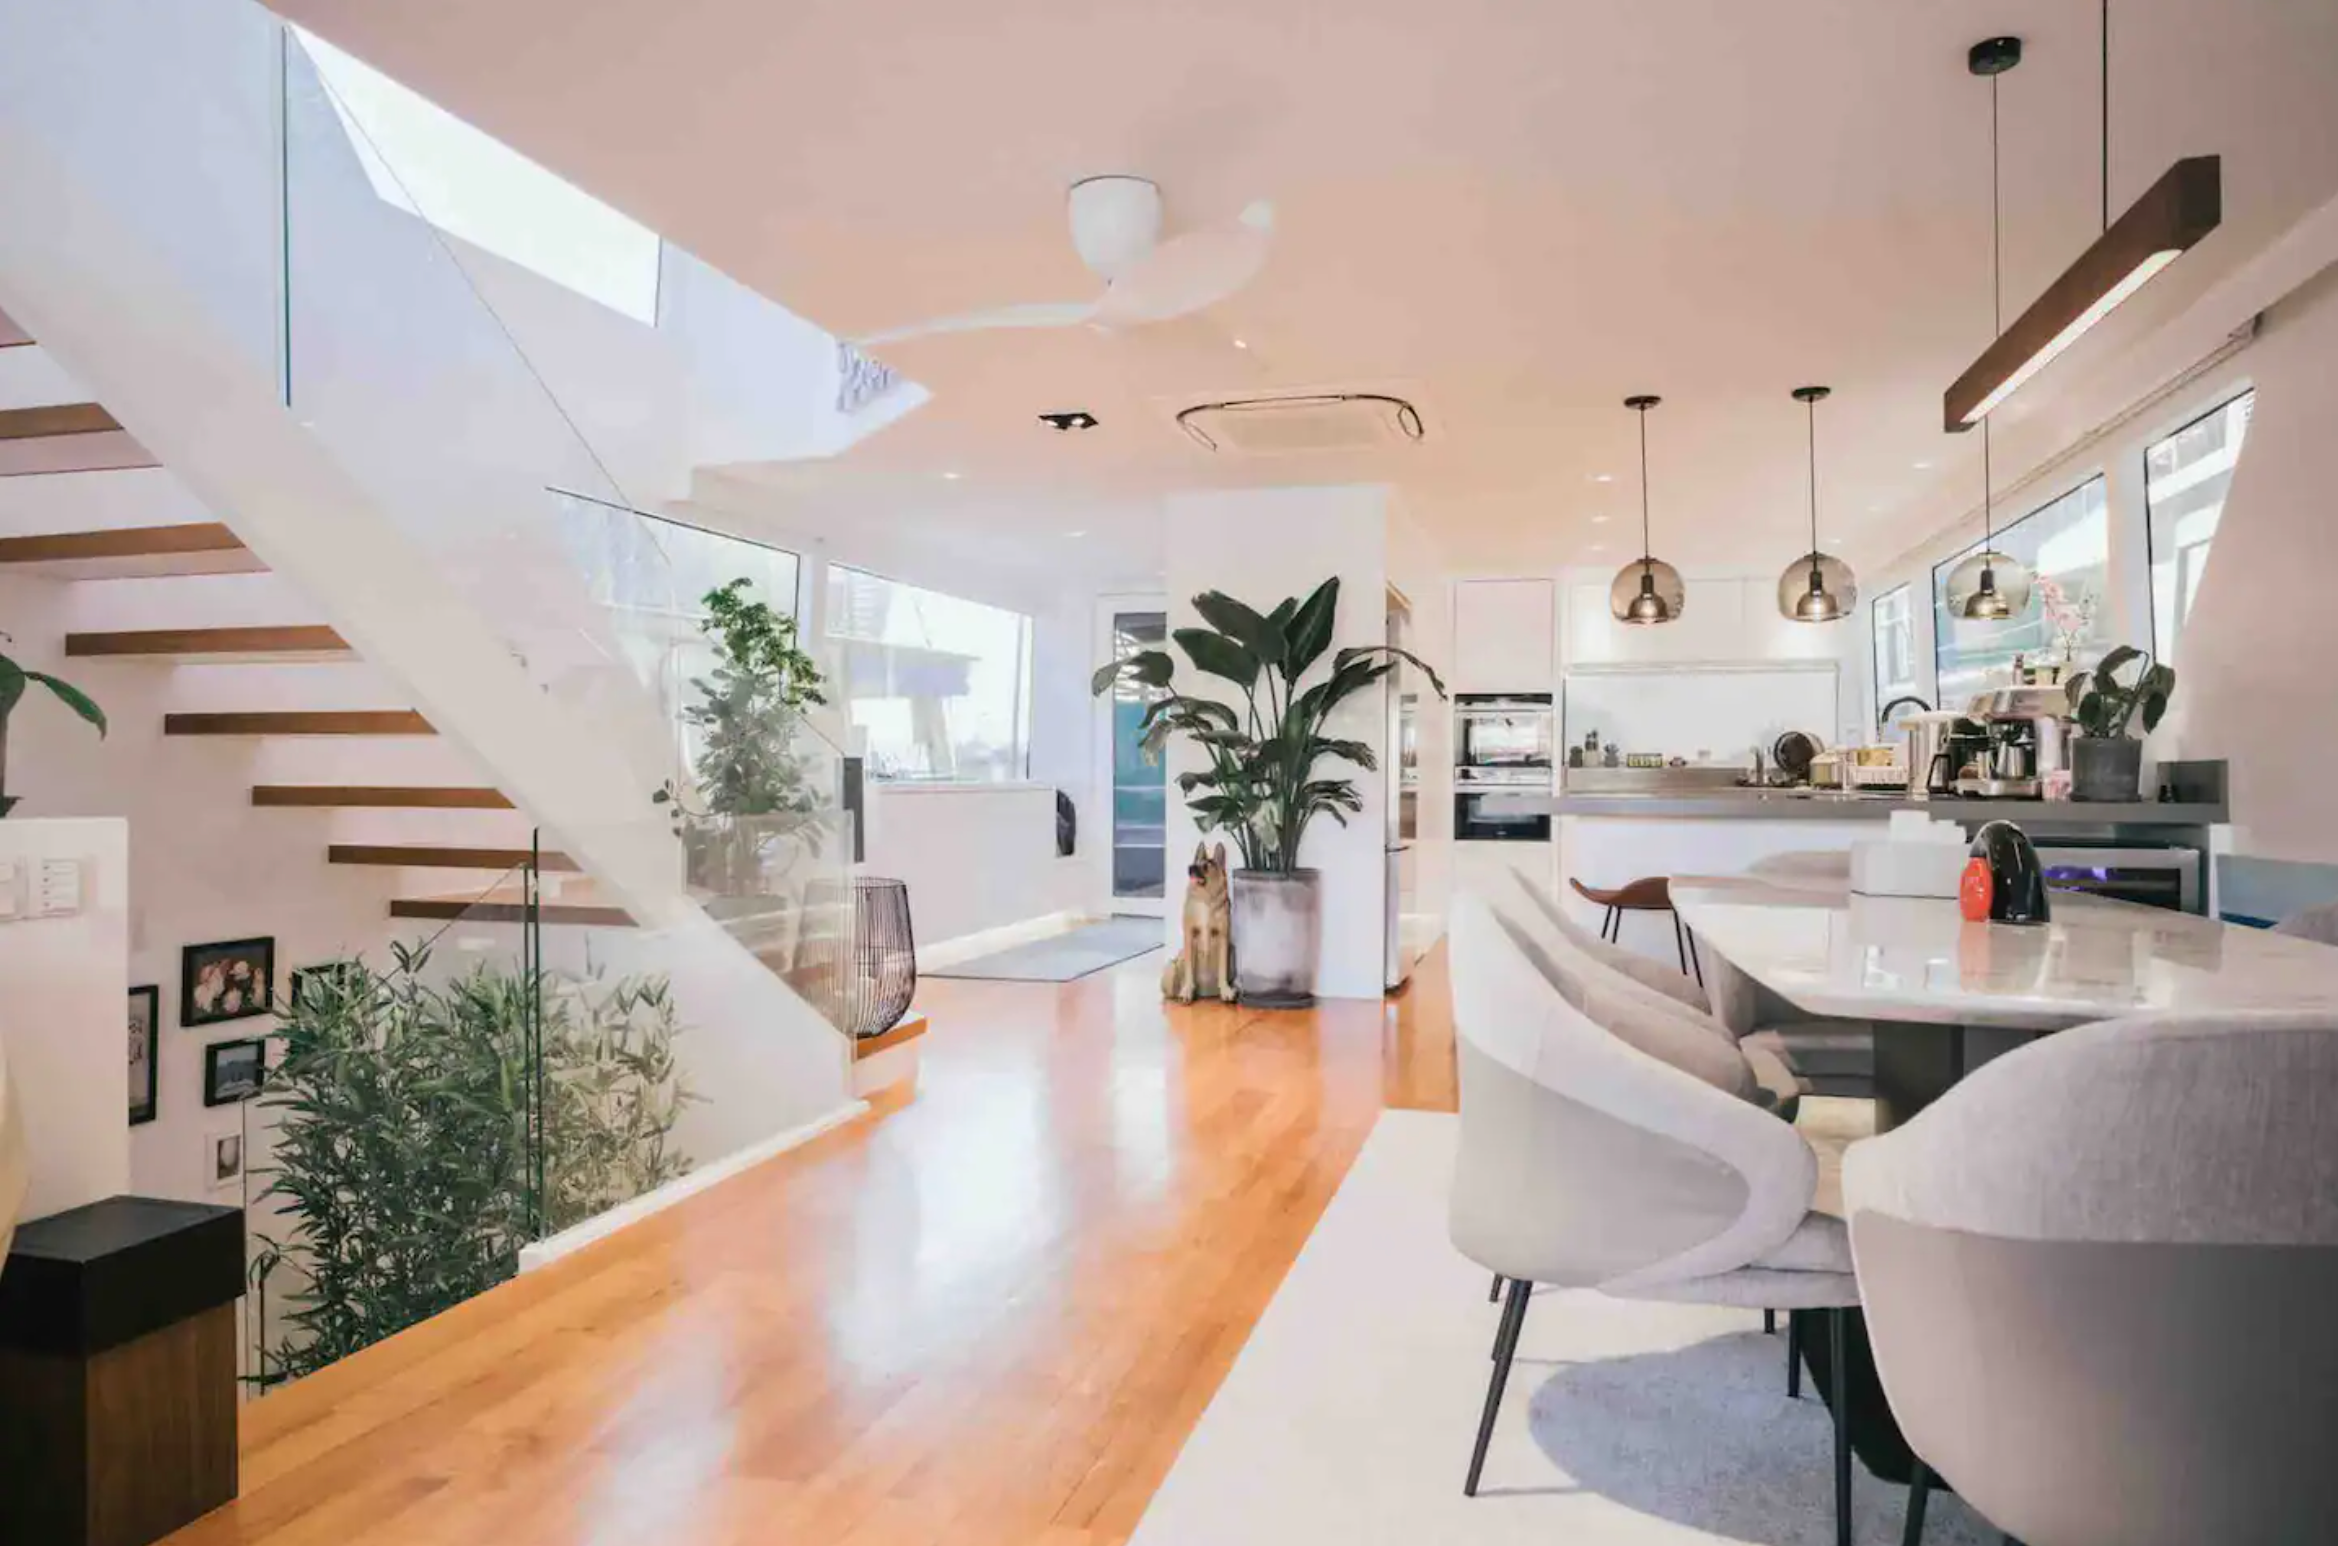 <p><strong>Bed & bath:</strong> 3 bedrooms, 3.5 baths<br> <strong>Top amenities:</strong> Complimentary butler and cooking services, multiple outdoor decks</p> <p>It’s impossible not to have a good time on “Oasis,” a 3,000-square-foot yacht docked in the historic Aberdeen harbor on Hong Kong Island’s South side. Brimming with luxuries big and small, the glamorous three-bedroom Airbnb is ideal for a family trip, thanks to the massive open-plan kitchen, dining room, and living room. Go hard with karaoke or chill out with a barbecue on one of the terraces. The icing on the cake? Superhost Matthew offers complimentary butler and cooking services—with free beer thrown in for good measure. Yachting and wake-surfing services can be arranged for an added cost.</p> $1535, Airbnb (starting price). <a href="https://www.airbnb.com/rooms/556913445113916071">Get it now!</a><p>Sign up to receive the latest news, expert tips, and inspiration on all things travel</p><a href="https://www.cntraveler.com/newsletter/the-daily?sourceCode=msnsend">Inspire Me</a>